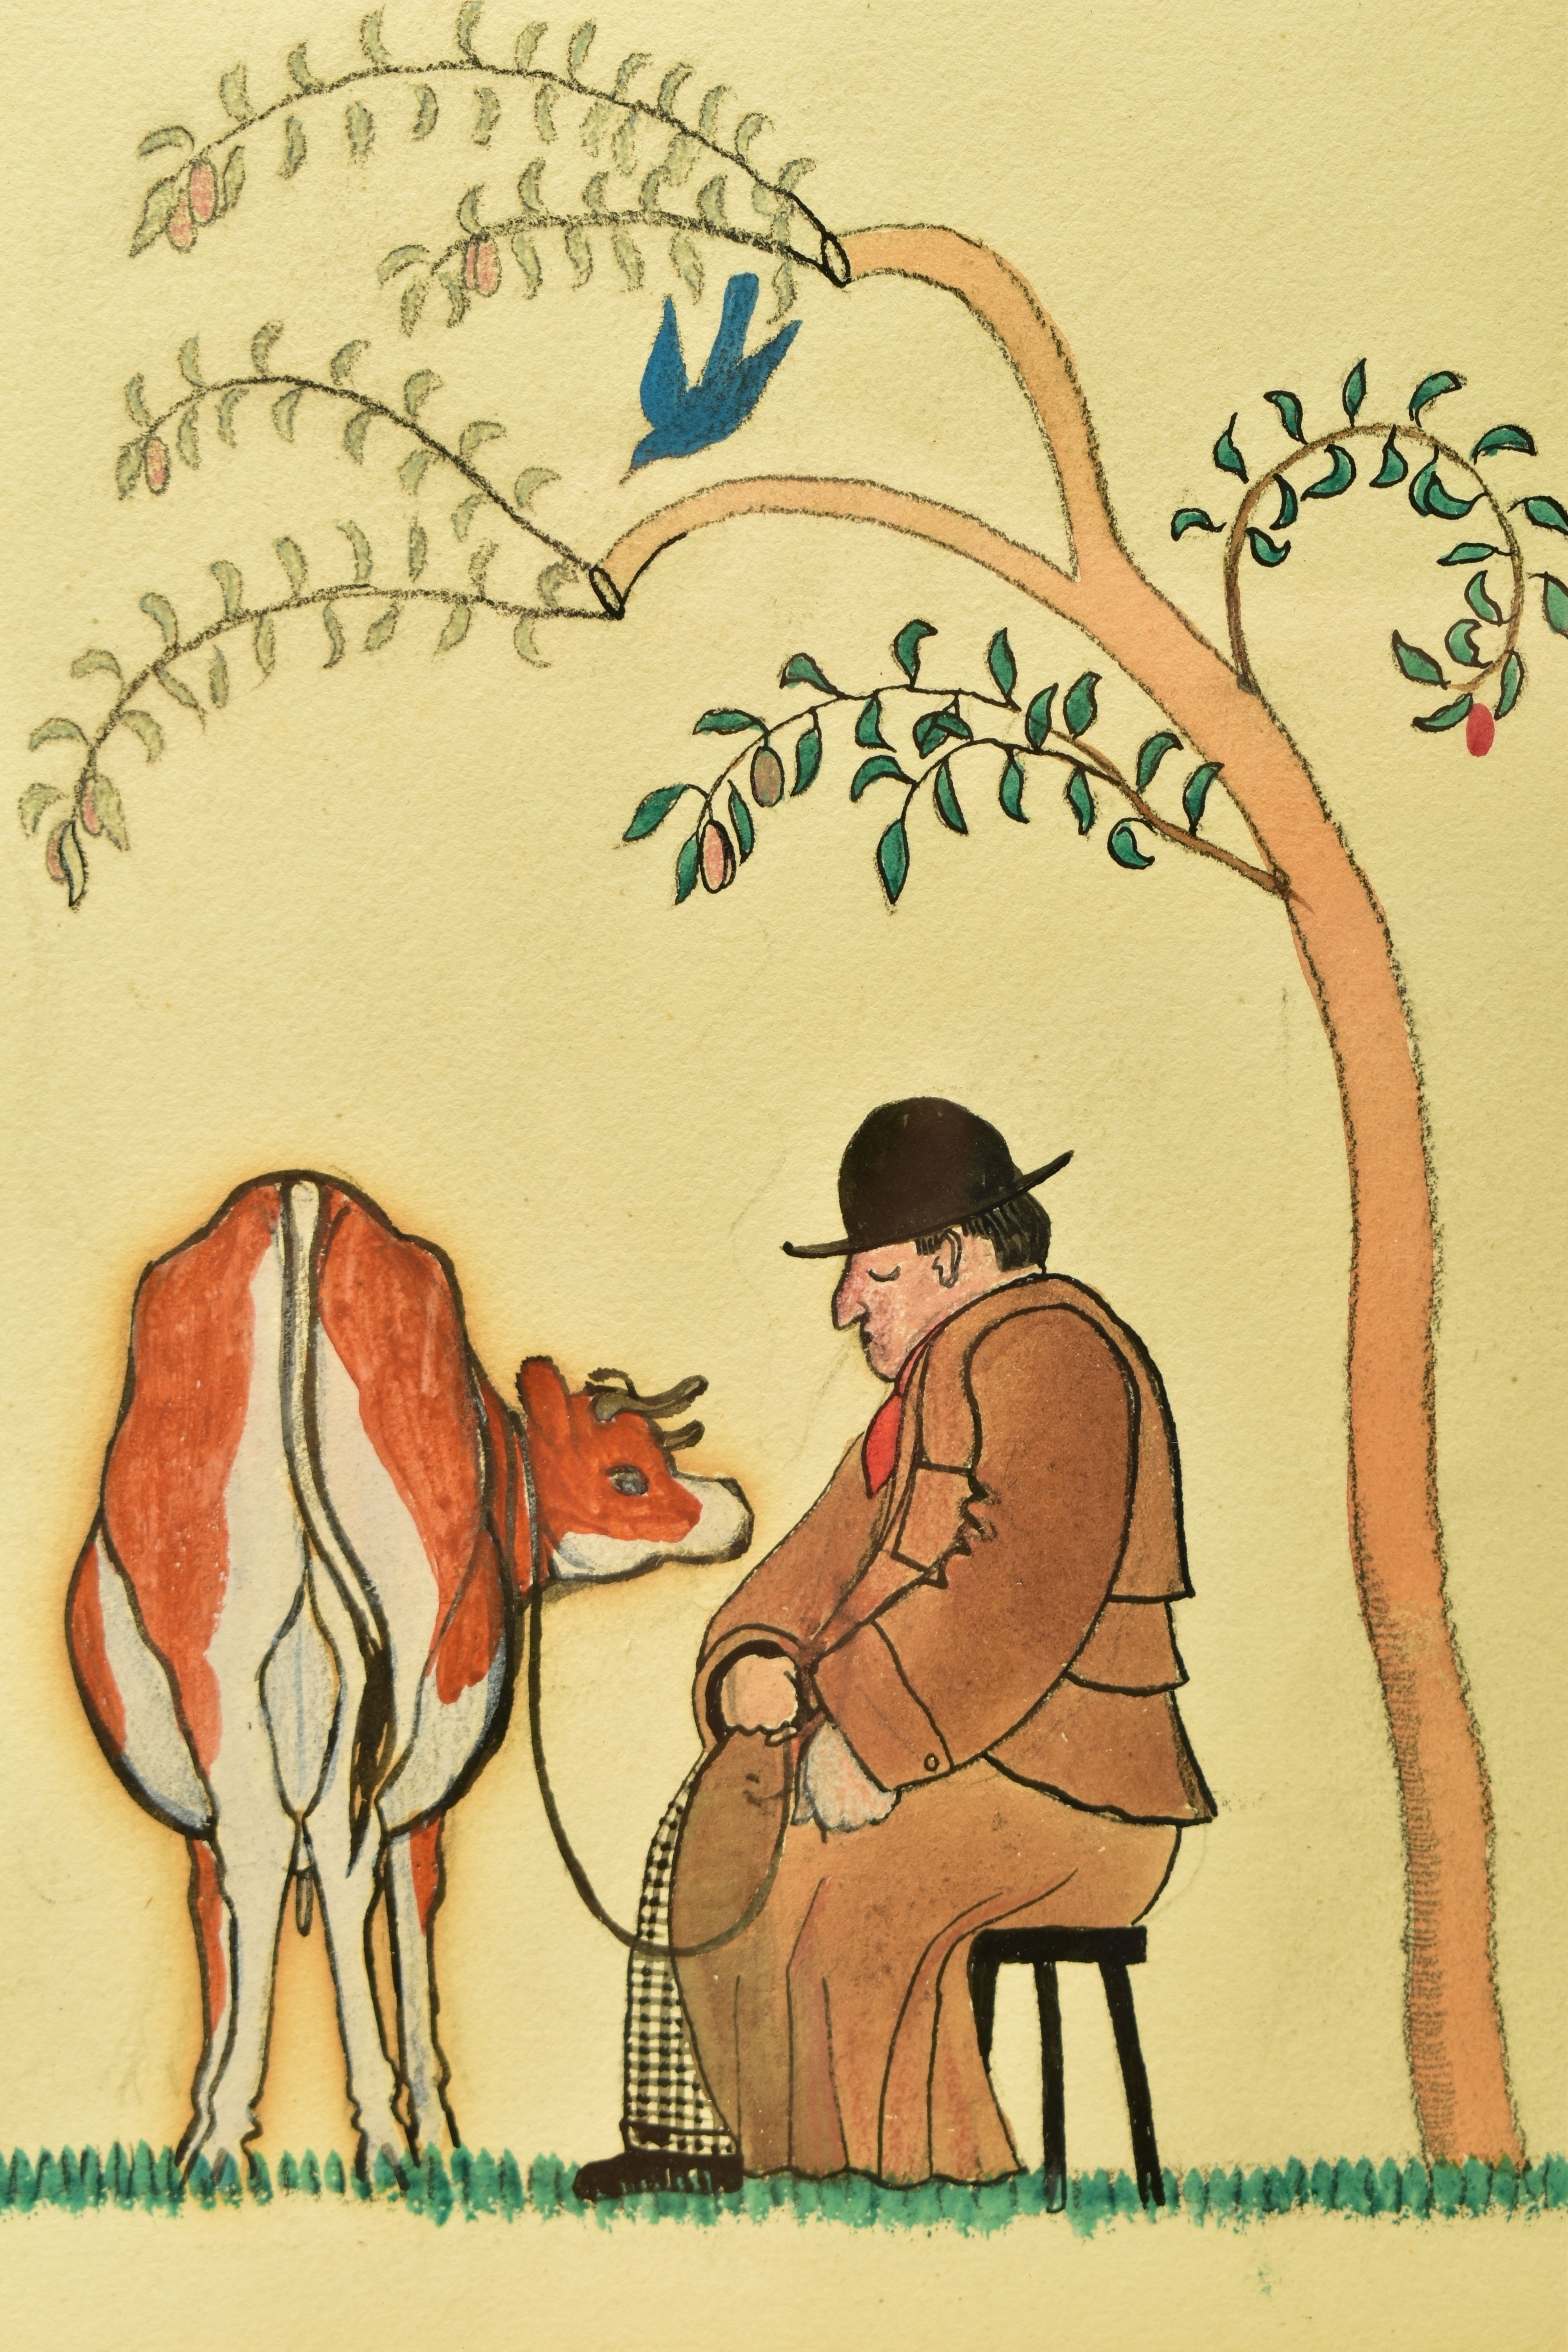 ATTRIBUTED TO ALBERT RUTHERSTON (1881-1953) AN ILLUSTRATION DEPICTING A MAN WITH A COW, no visible - Image 3 of 4